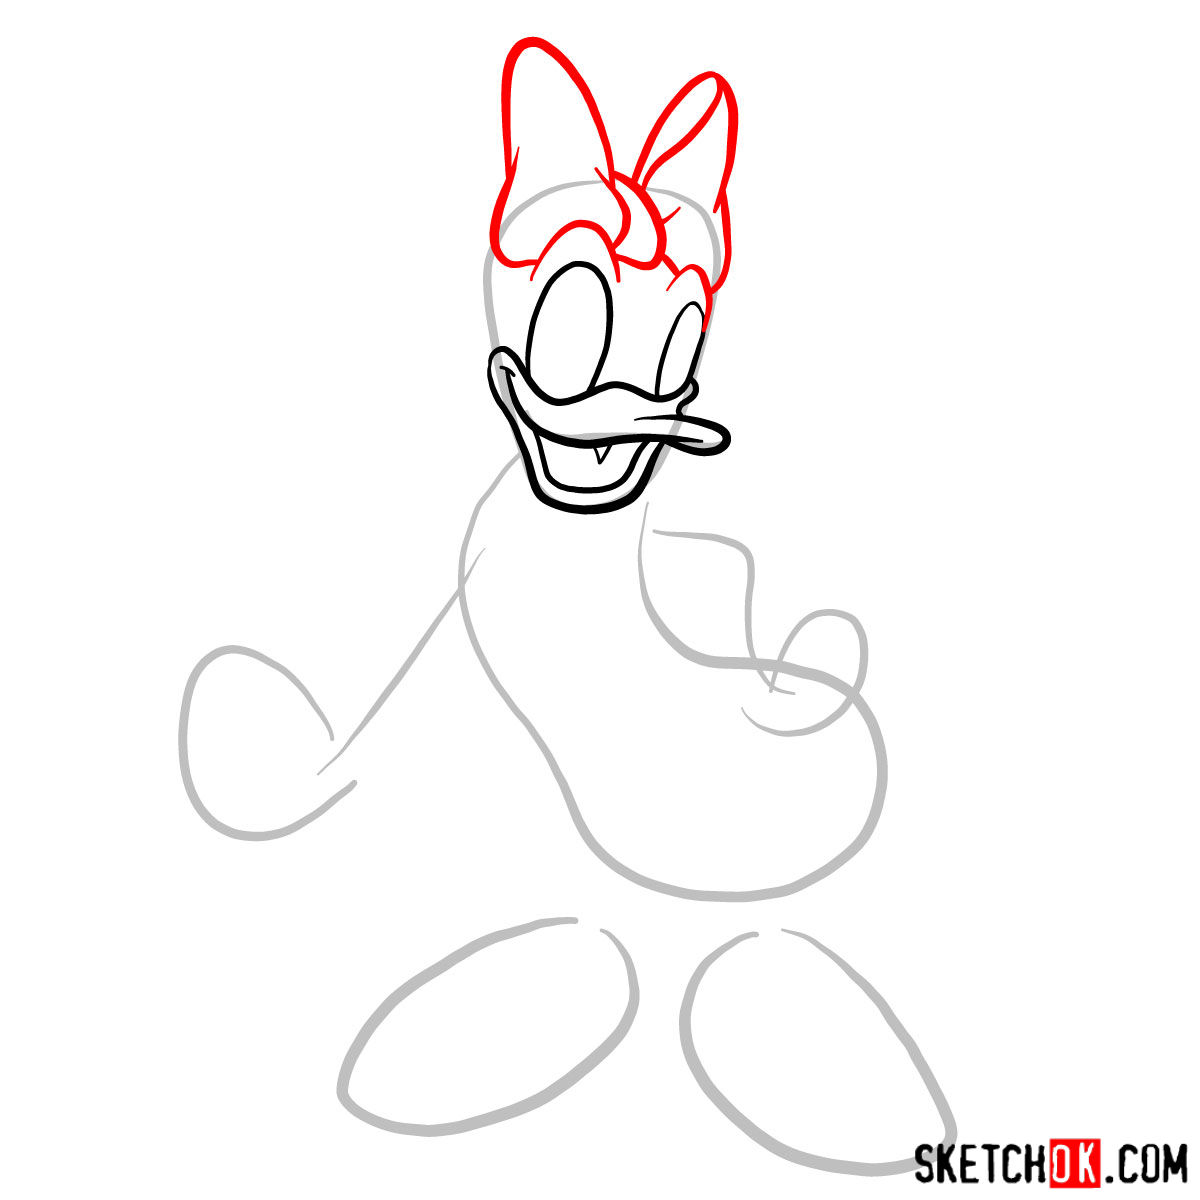 How to draw Daisy Duck - step 03